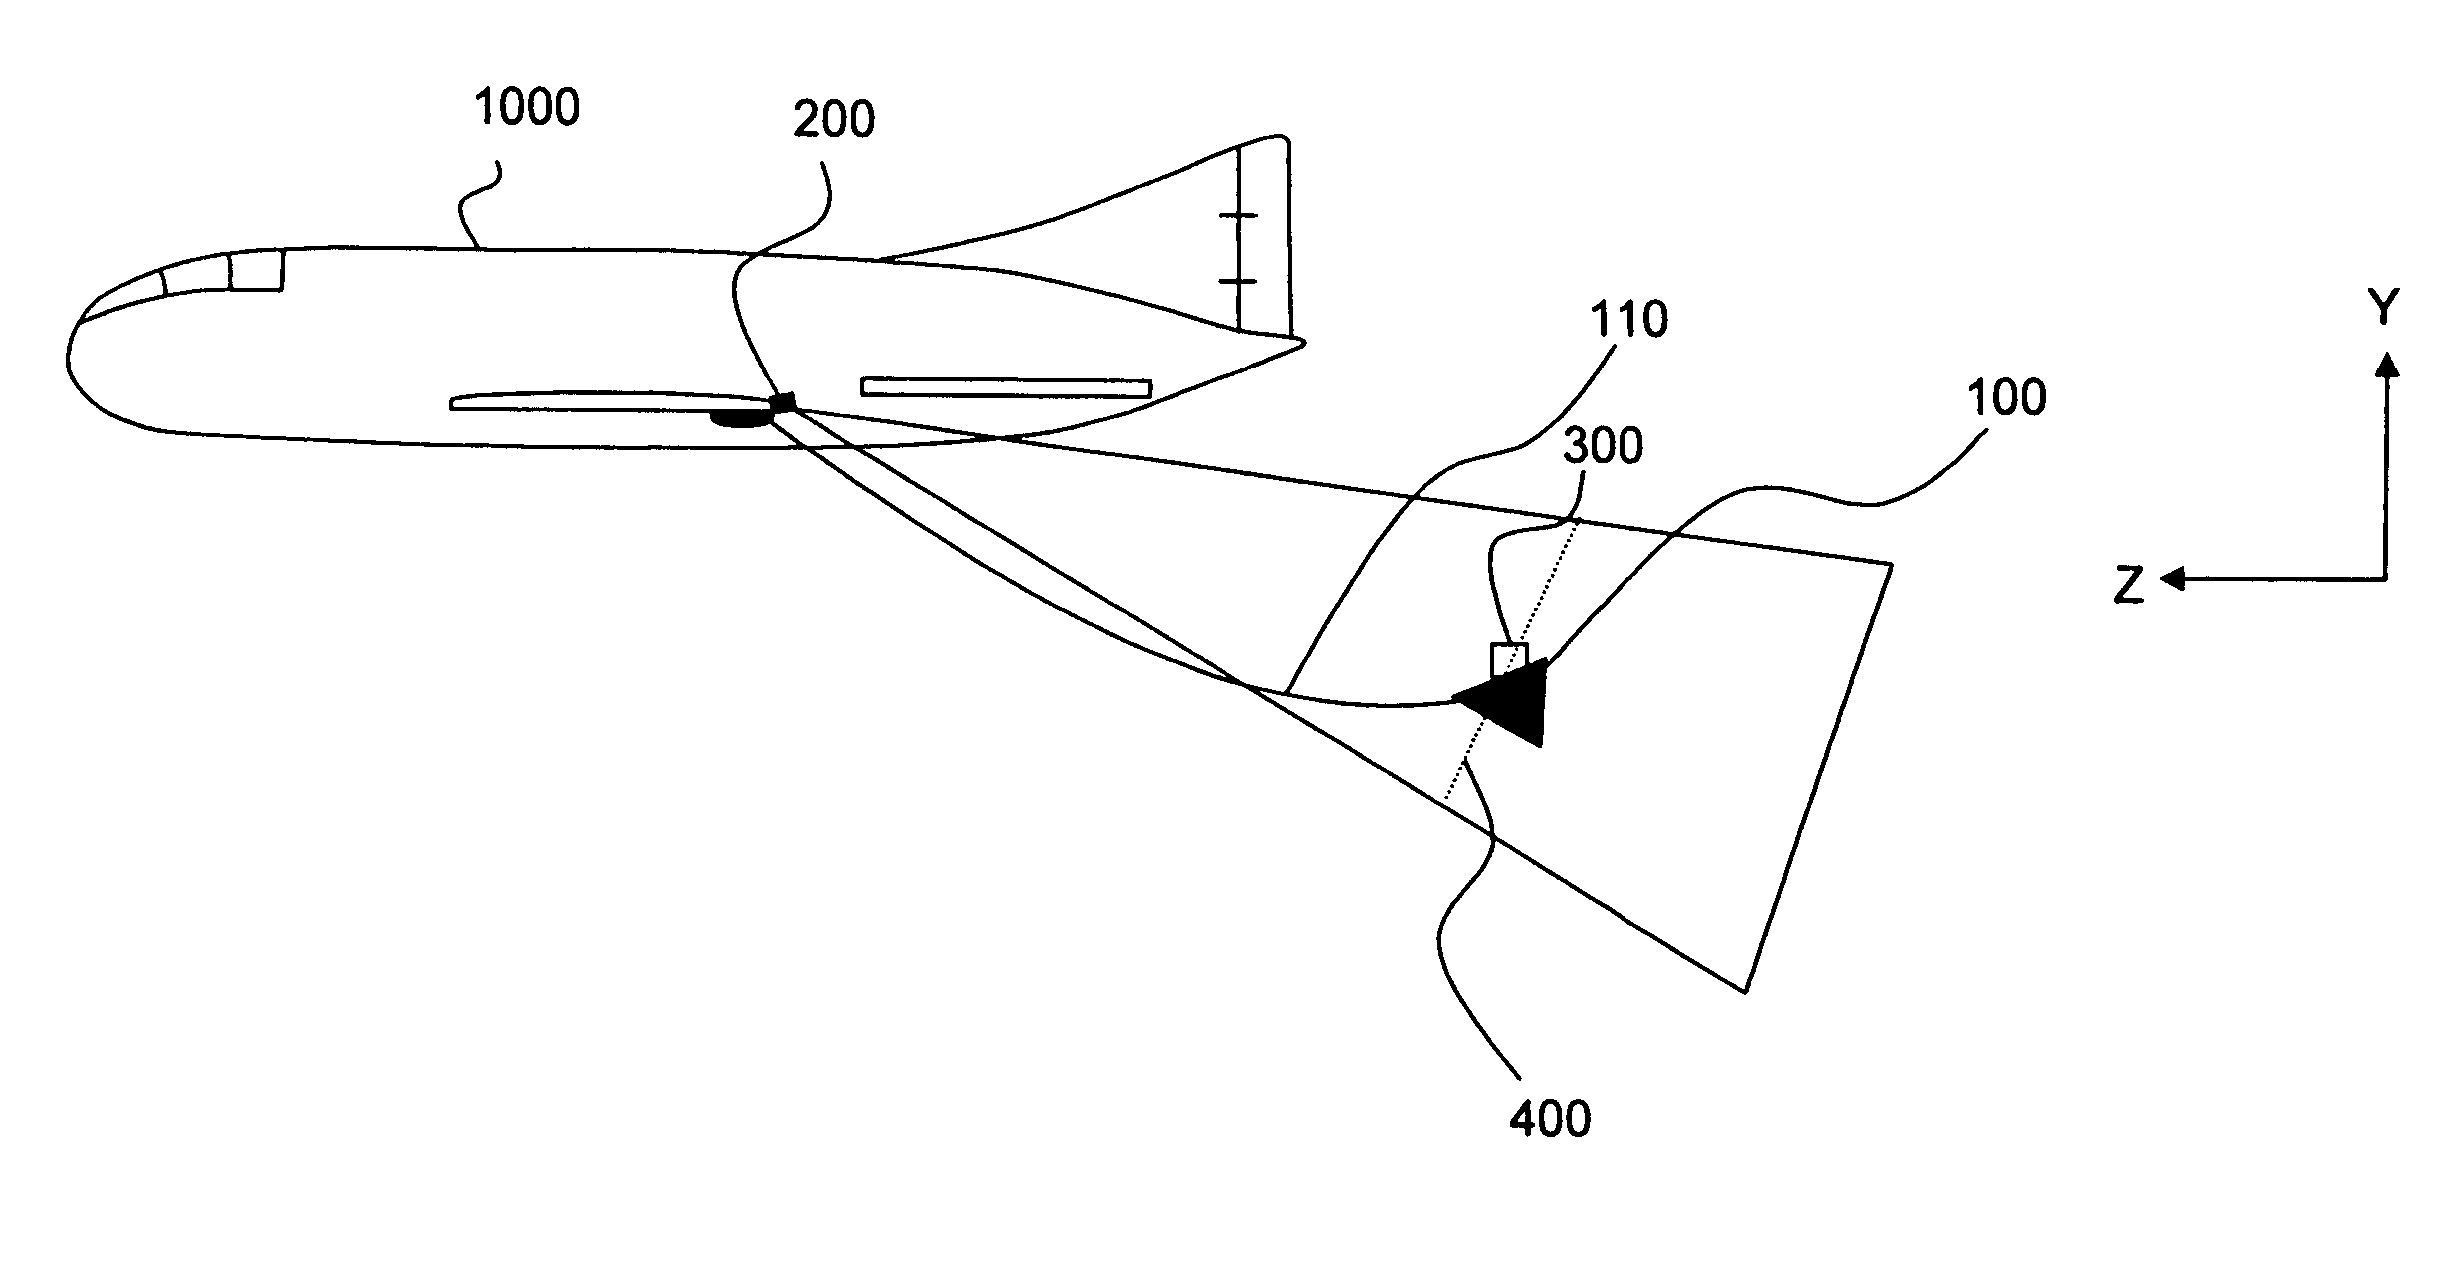 Optical tracking system for refueling